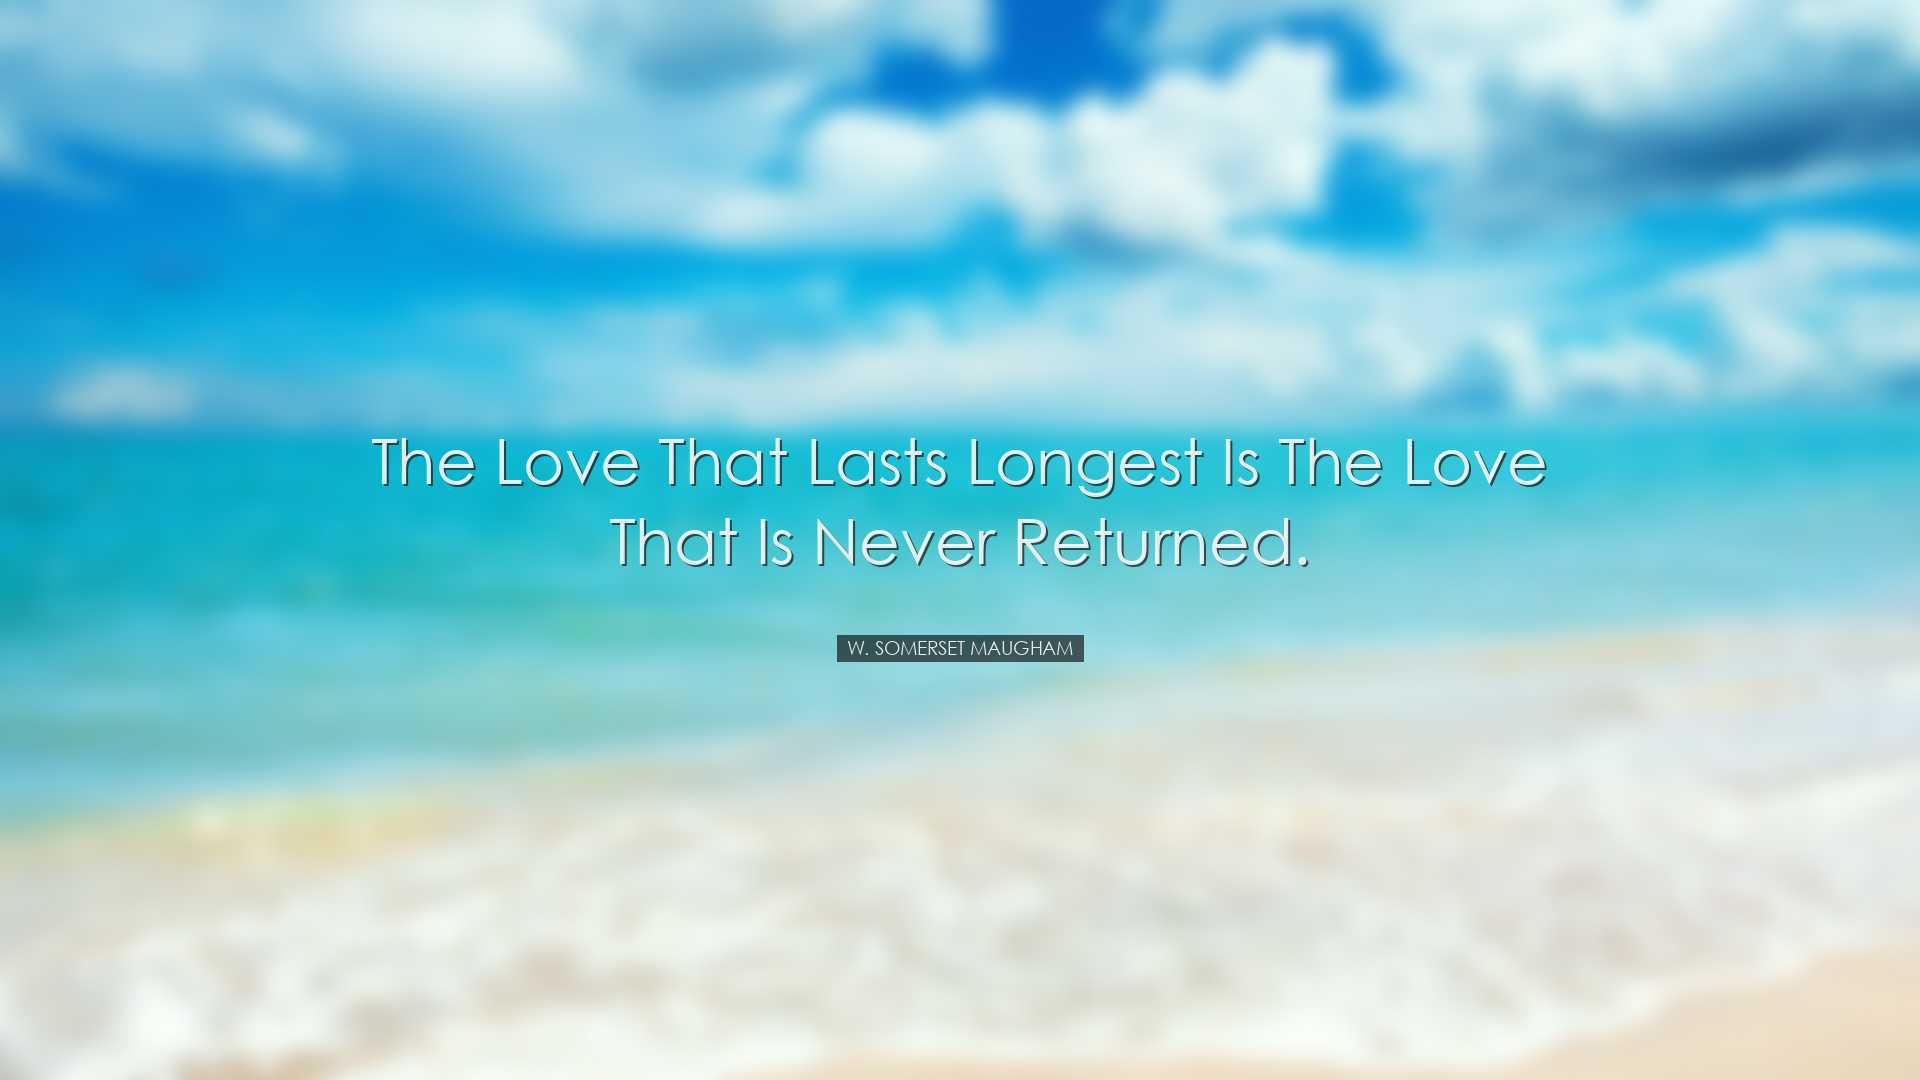 The love that lasts longest is the love that is never returned. -